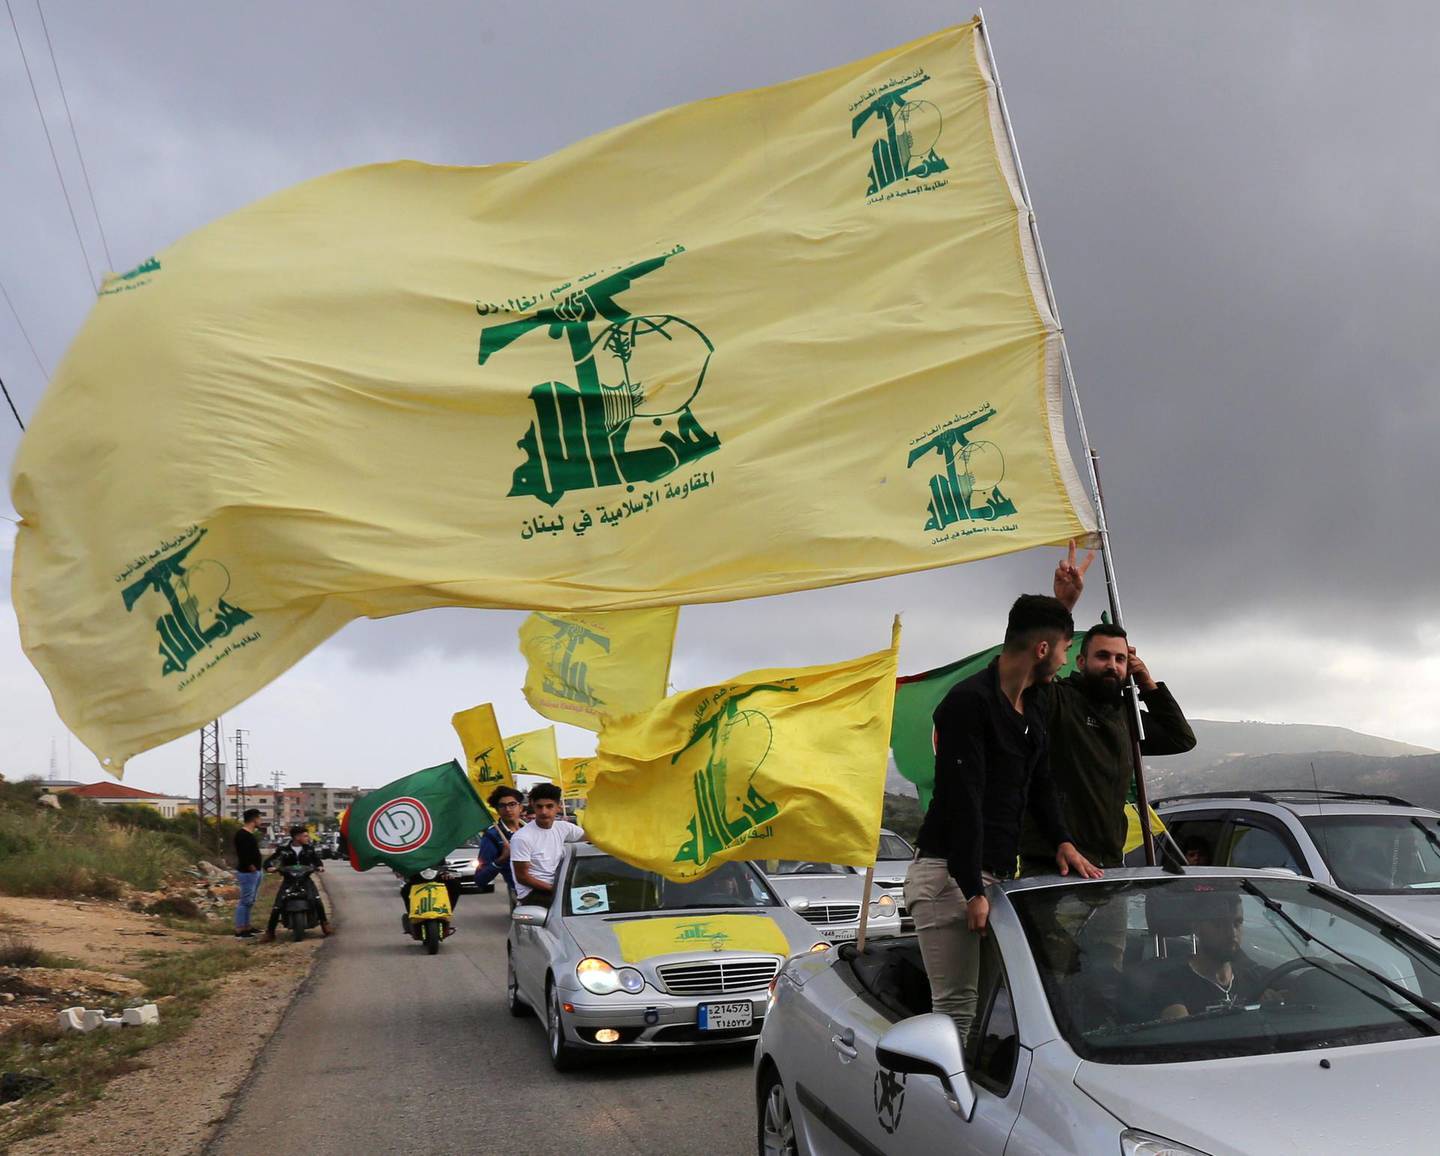 FILE PHOTO: A supporter of Lebanon's Hezbollah gestures as he holds a Hezbollah flag in Marjayoun, Lebanon May 7, 2018. REUTERS/Aziz Taher/File Photo